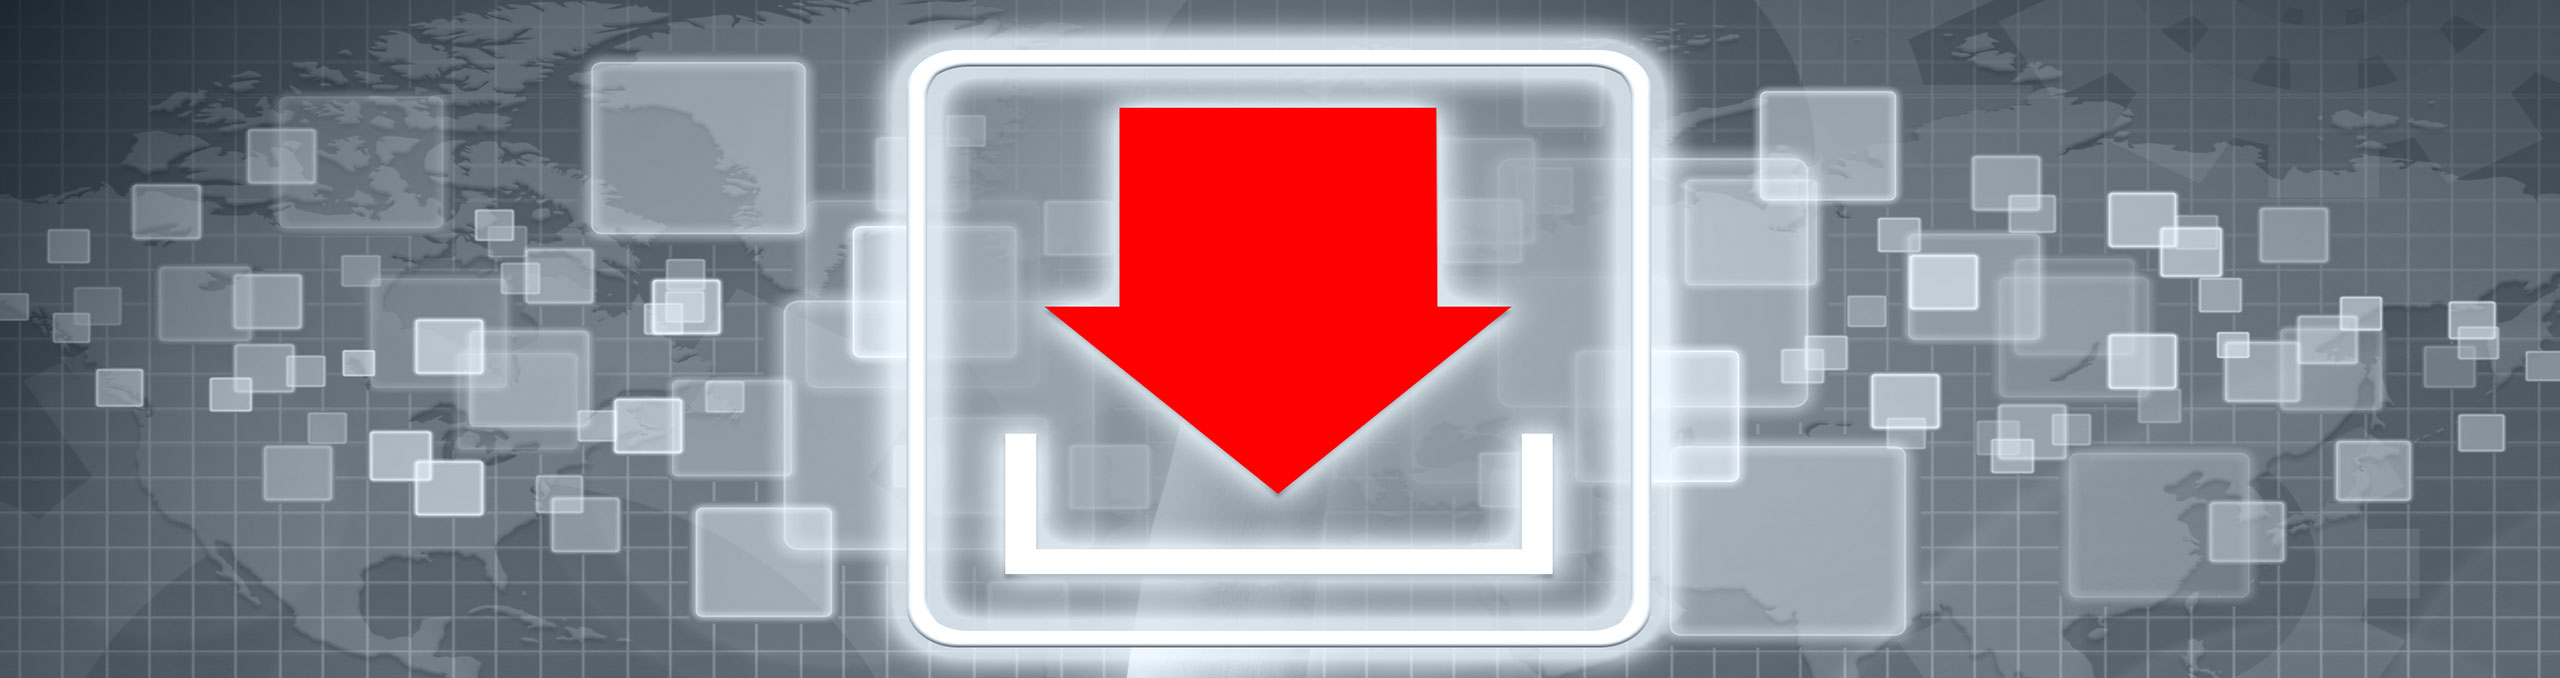 Red arrow download icon with digital overlay on a map